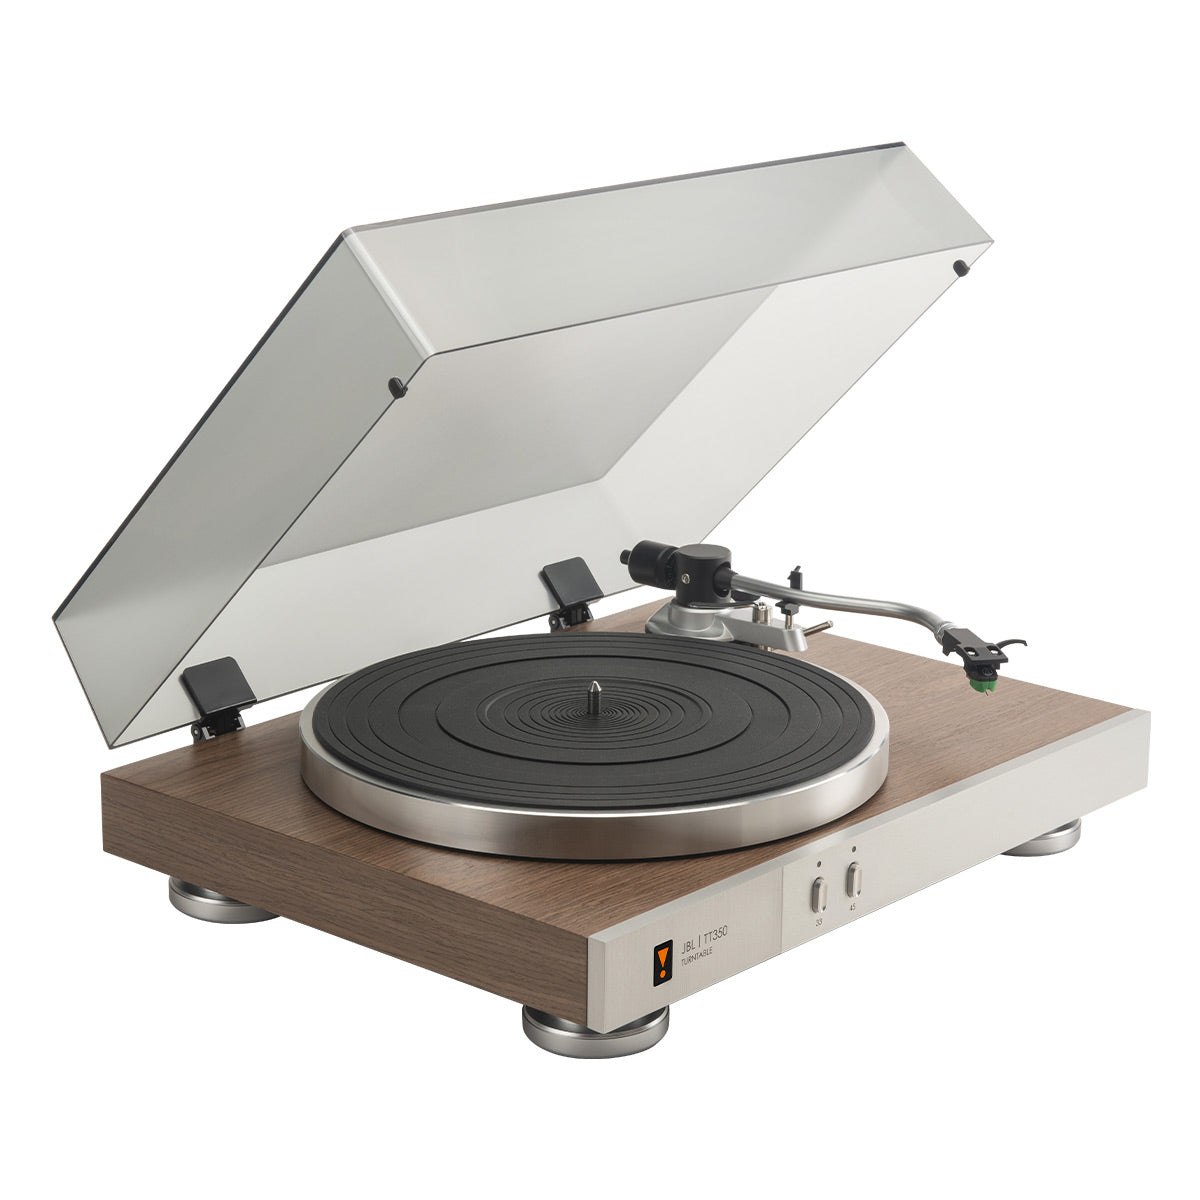 JBL TT350 Classic Direct Drive Turntable with Pre-Installed Audio Technica Cartridge